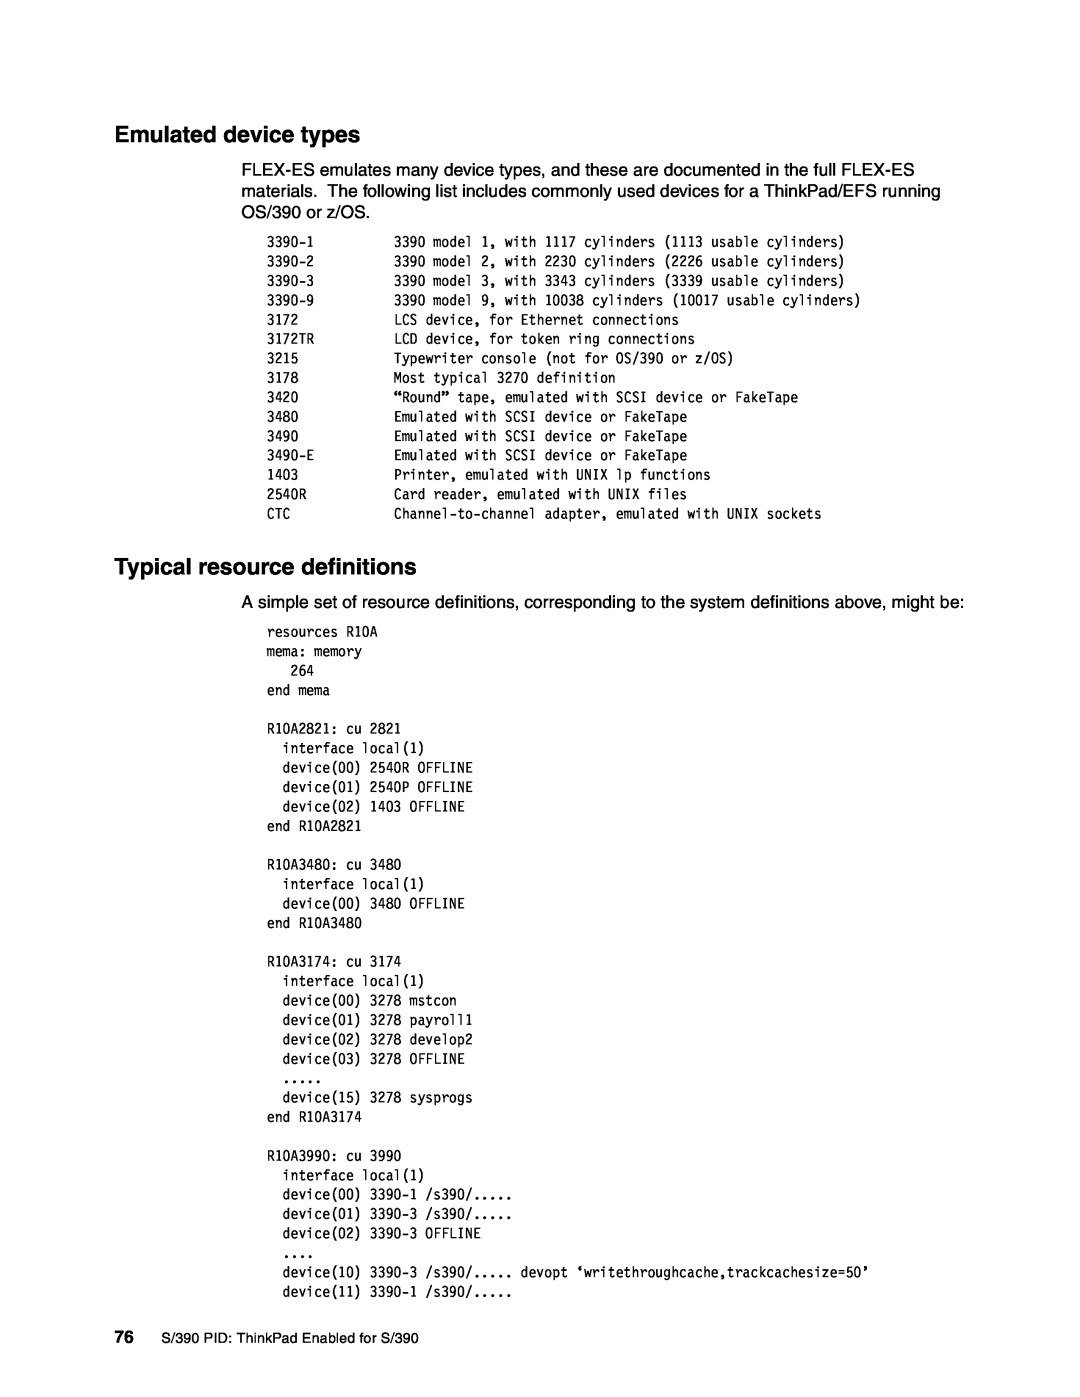 IBM s/390 manual Emulated device types, Typical resource definitions, 76 S/390 PID ThinkPad Enabled for S/390 